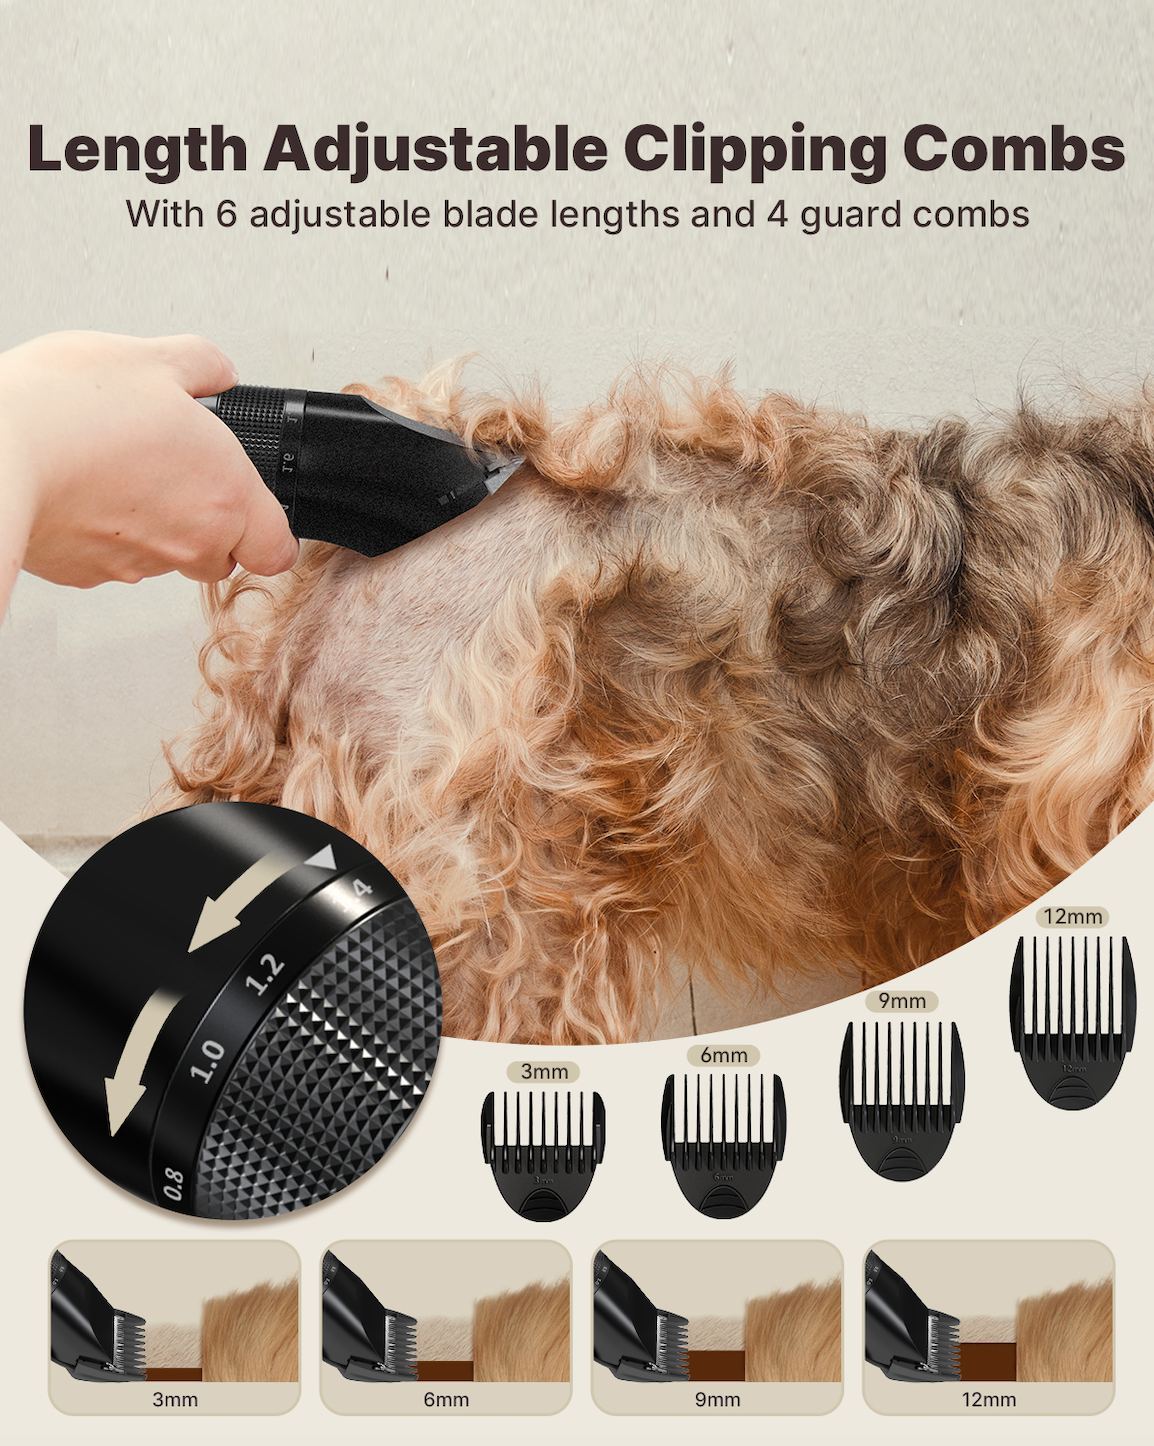 PAWBBY Grooming Clippers